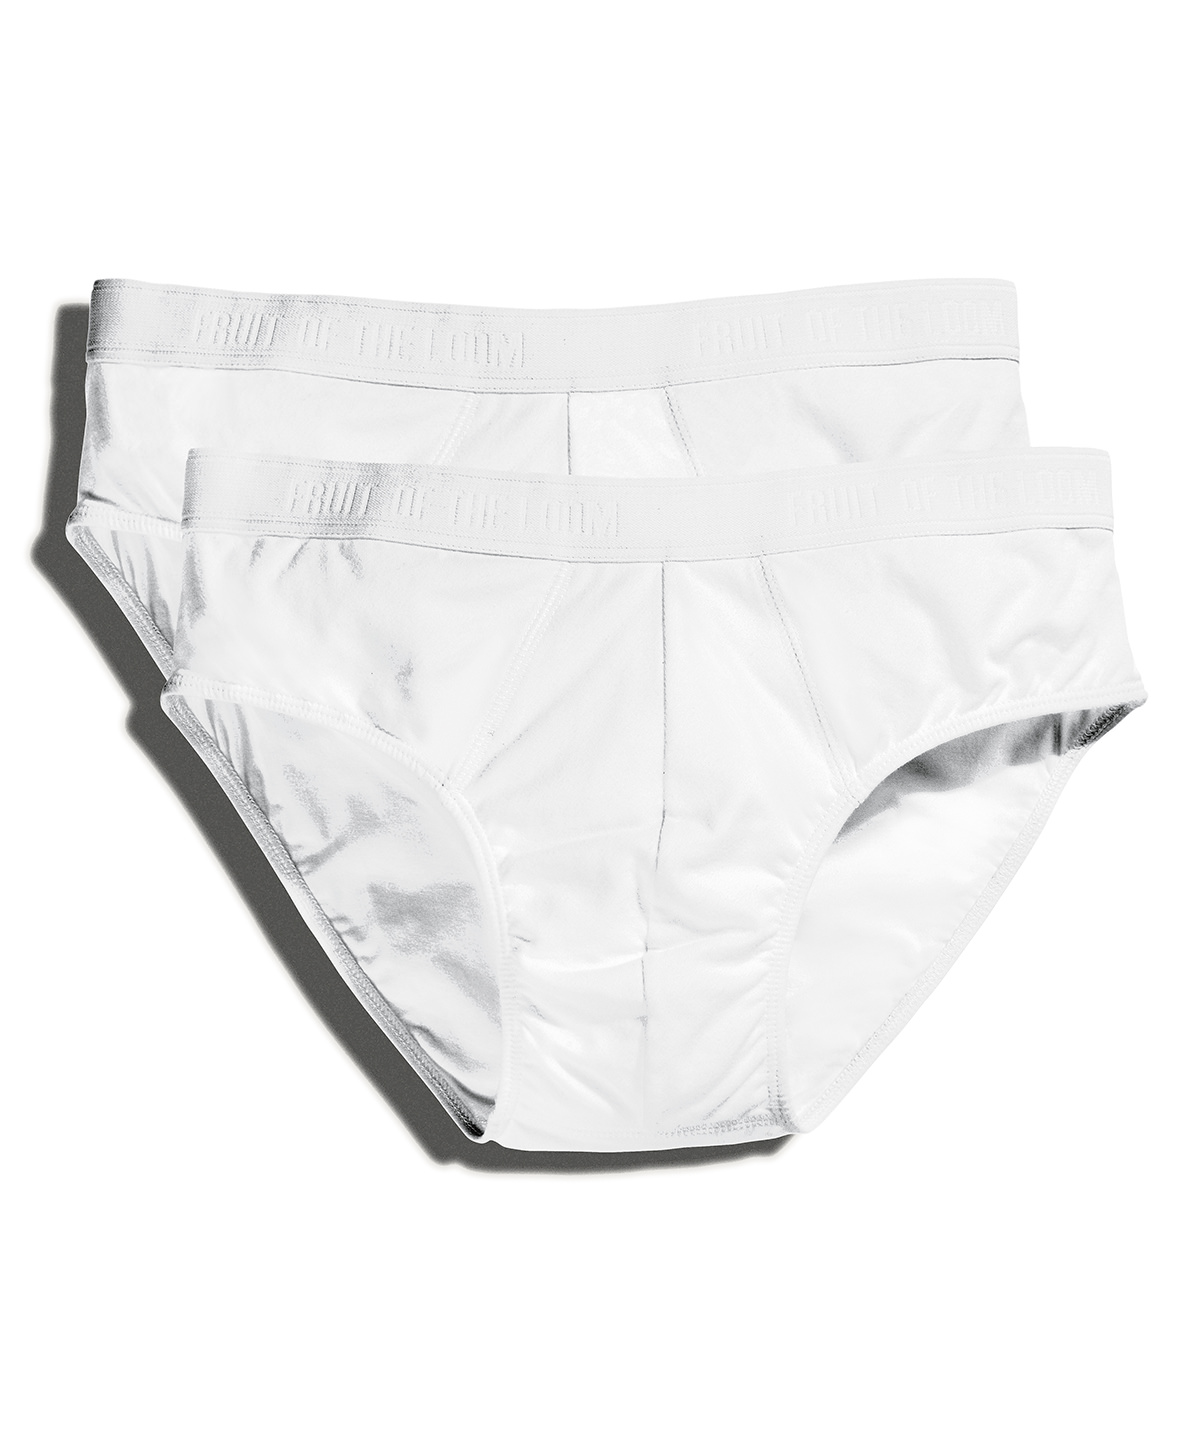 Classic Sport 2-Pack White Size 2XLarge